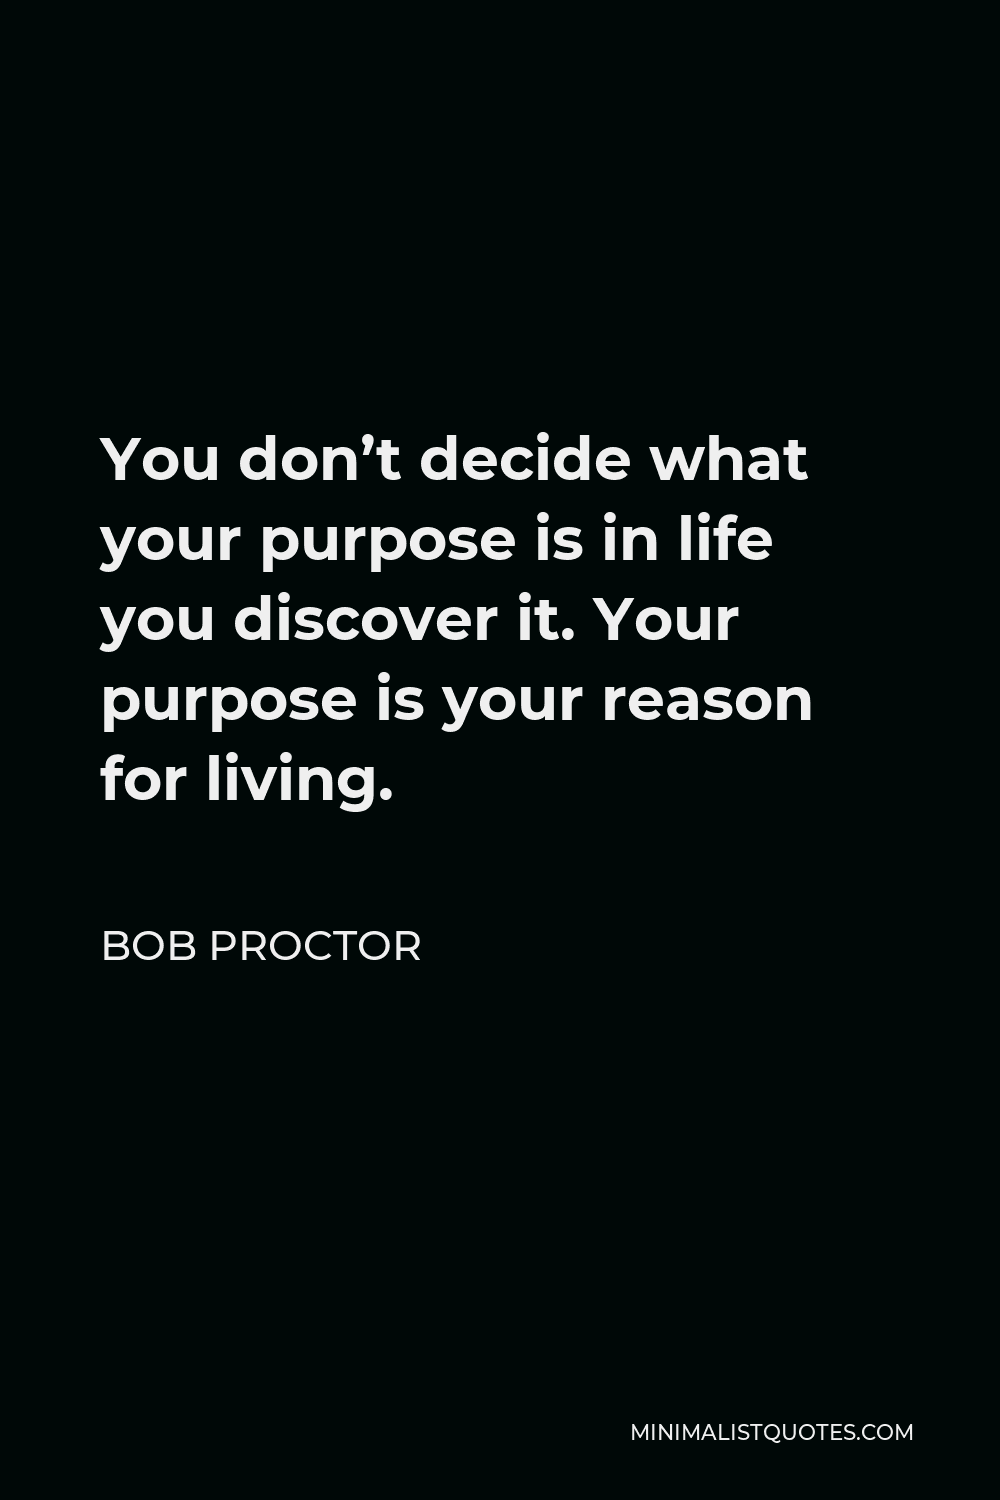 Bob Proctor Quote - You don’t decide what your purpose is in life you discover it. Your purpose is your reason for living.